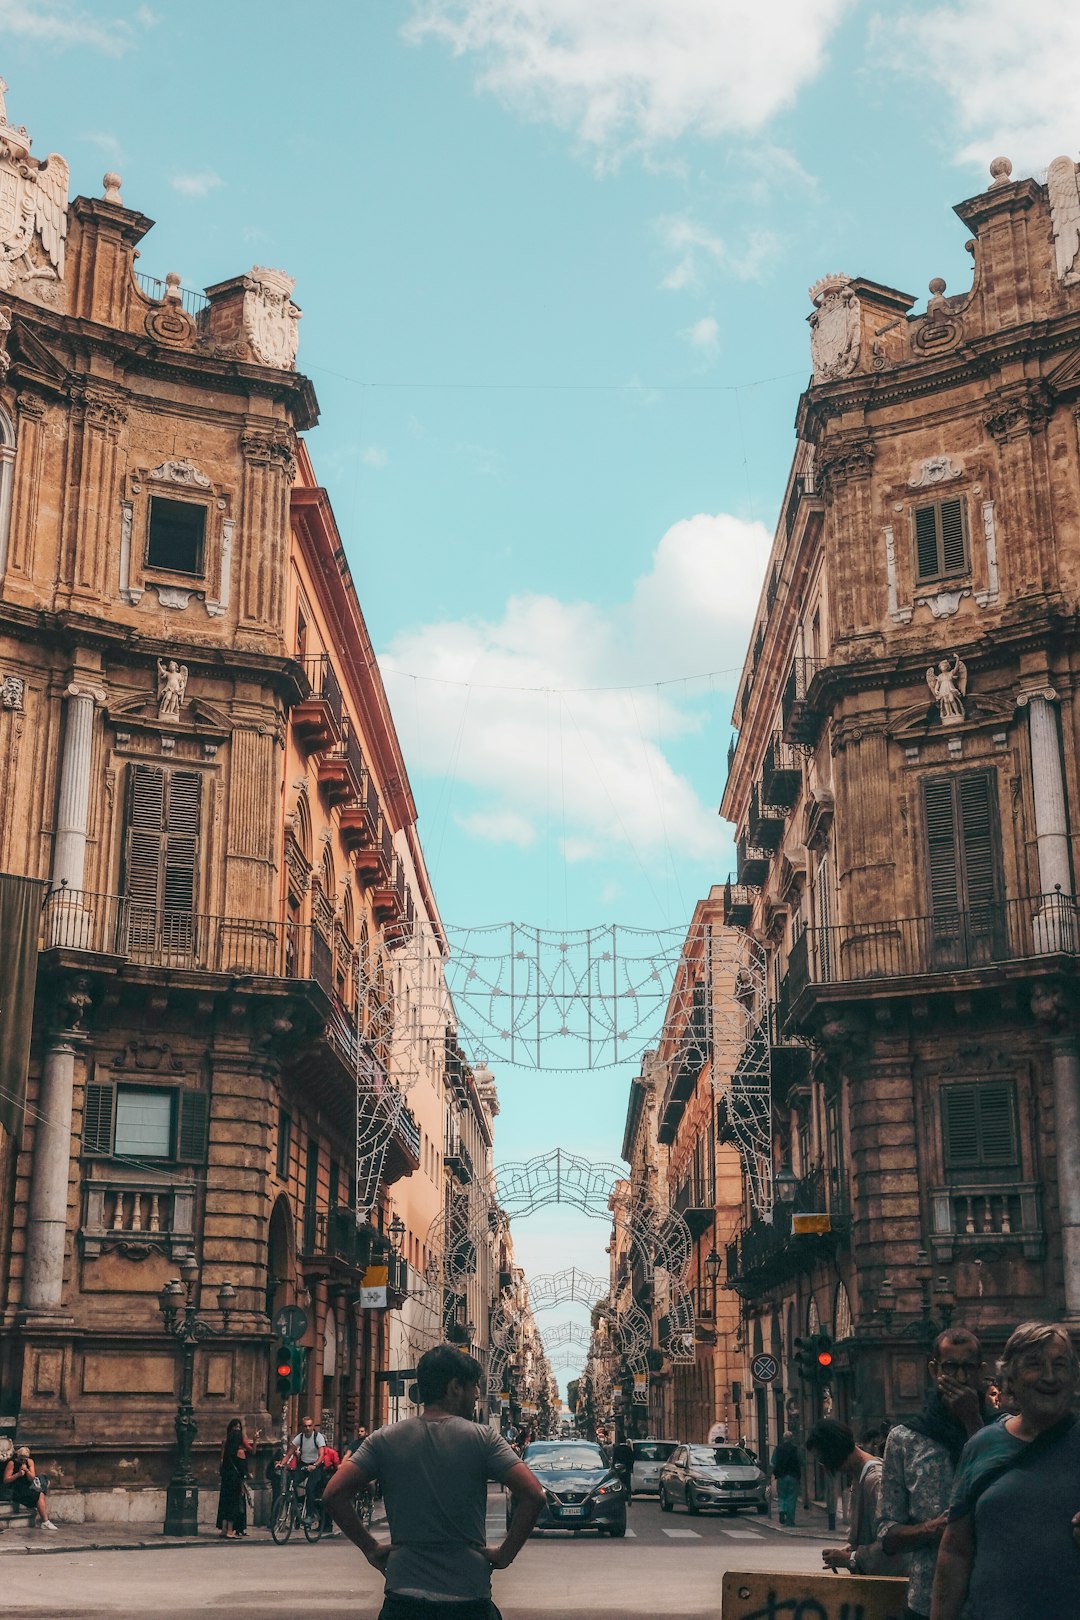 Travel Tips and Stories of Palermo in Italy